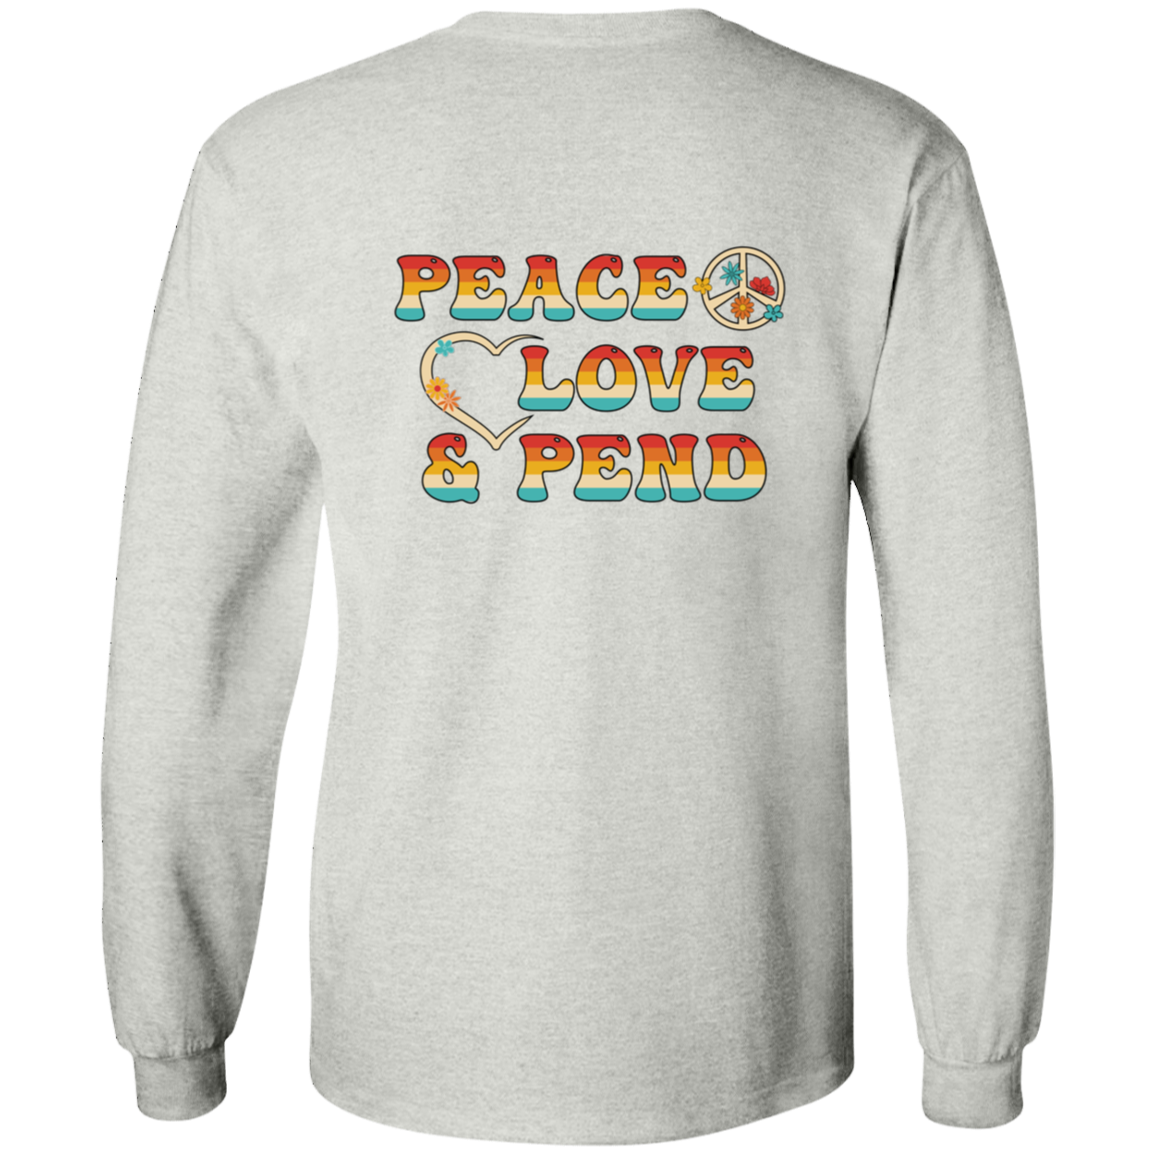 Peace, Love & Pend (Front & Back) - Long Sleeve